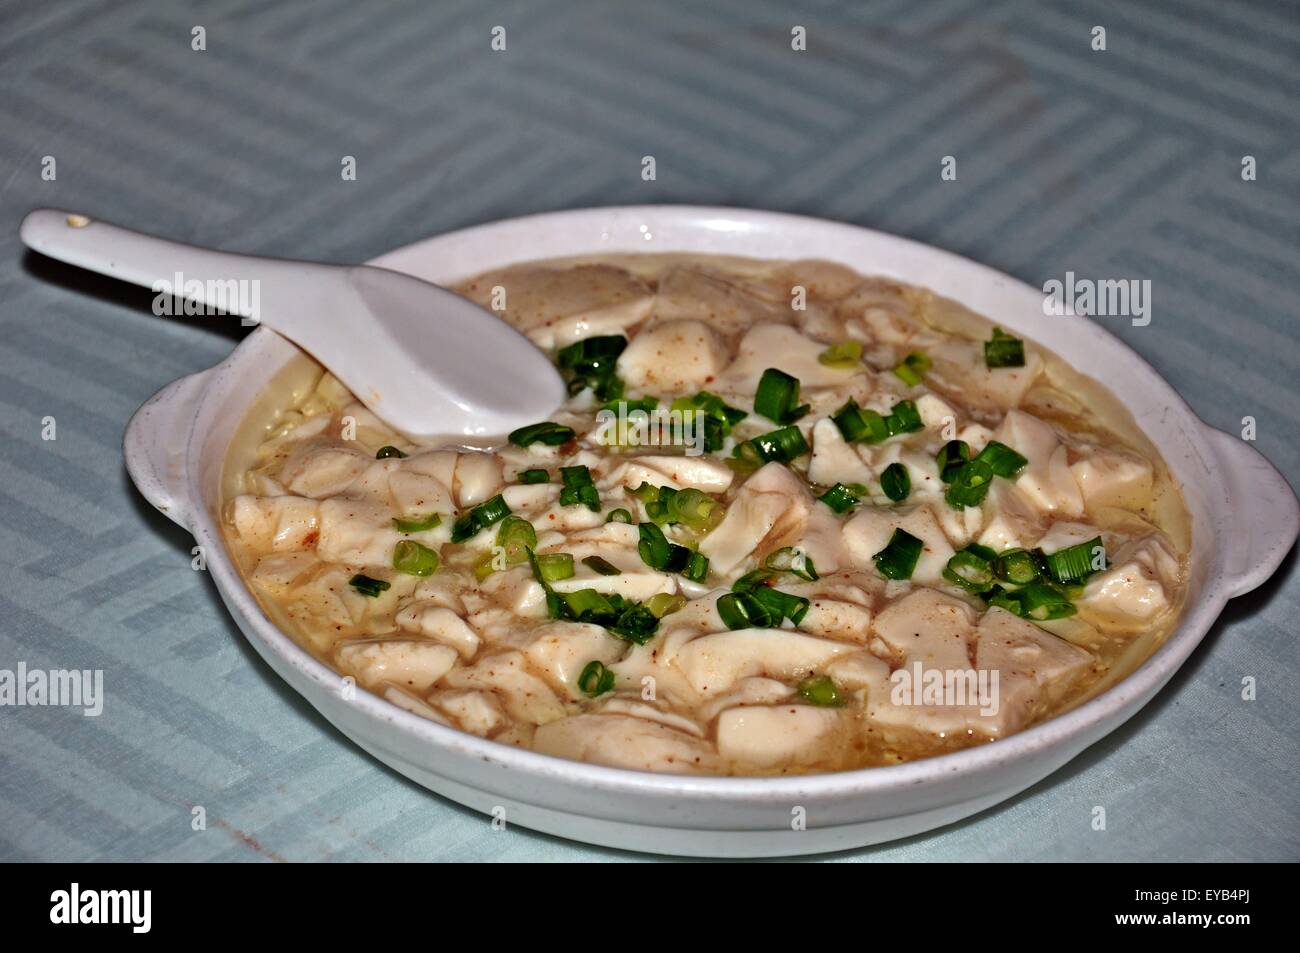 delicious spicy white tauhu with gravy served in the white big bowl Stock Photo